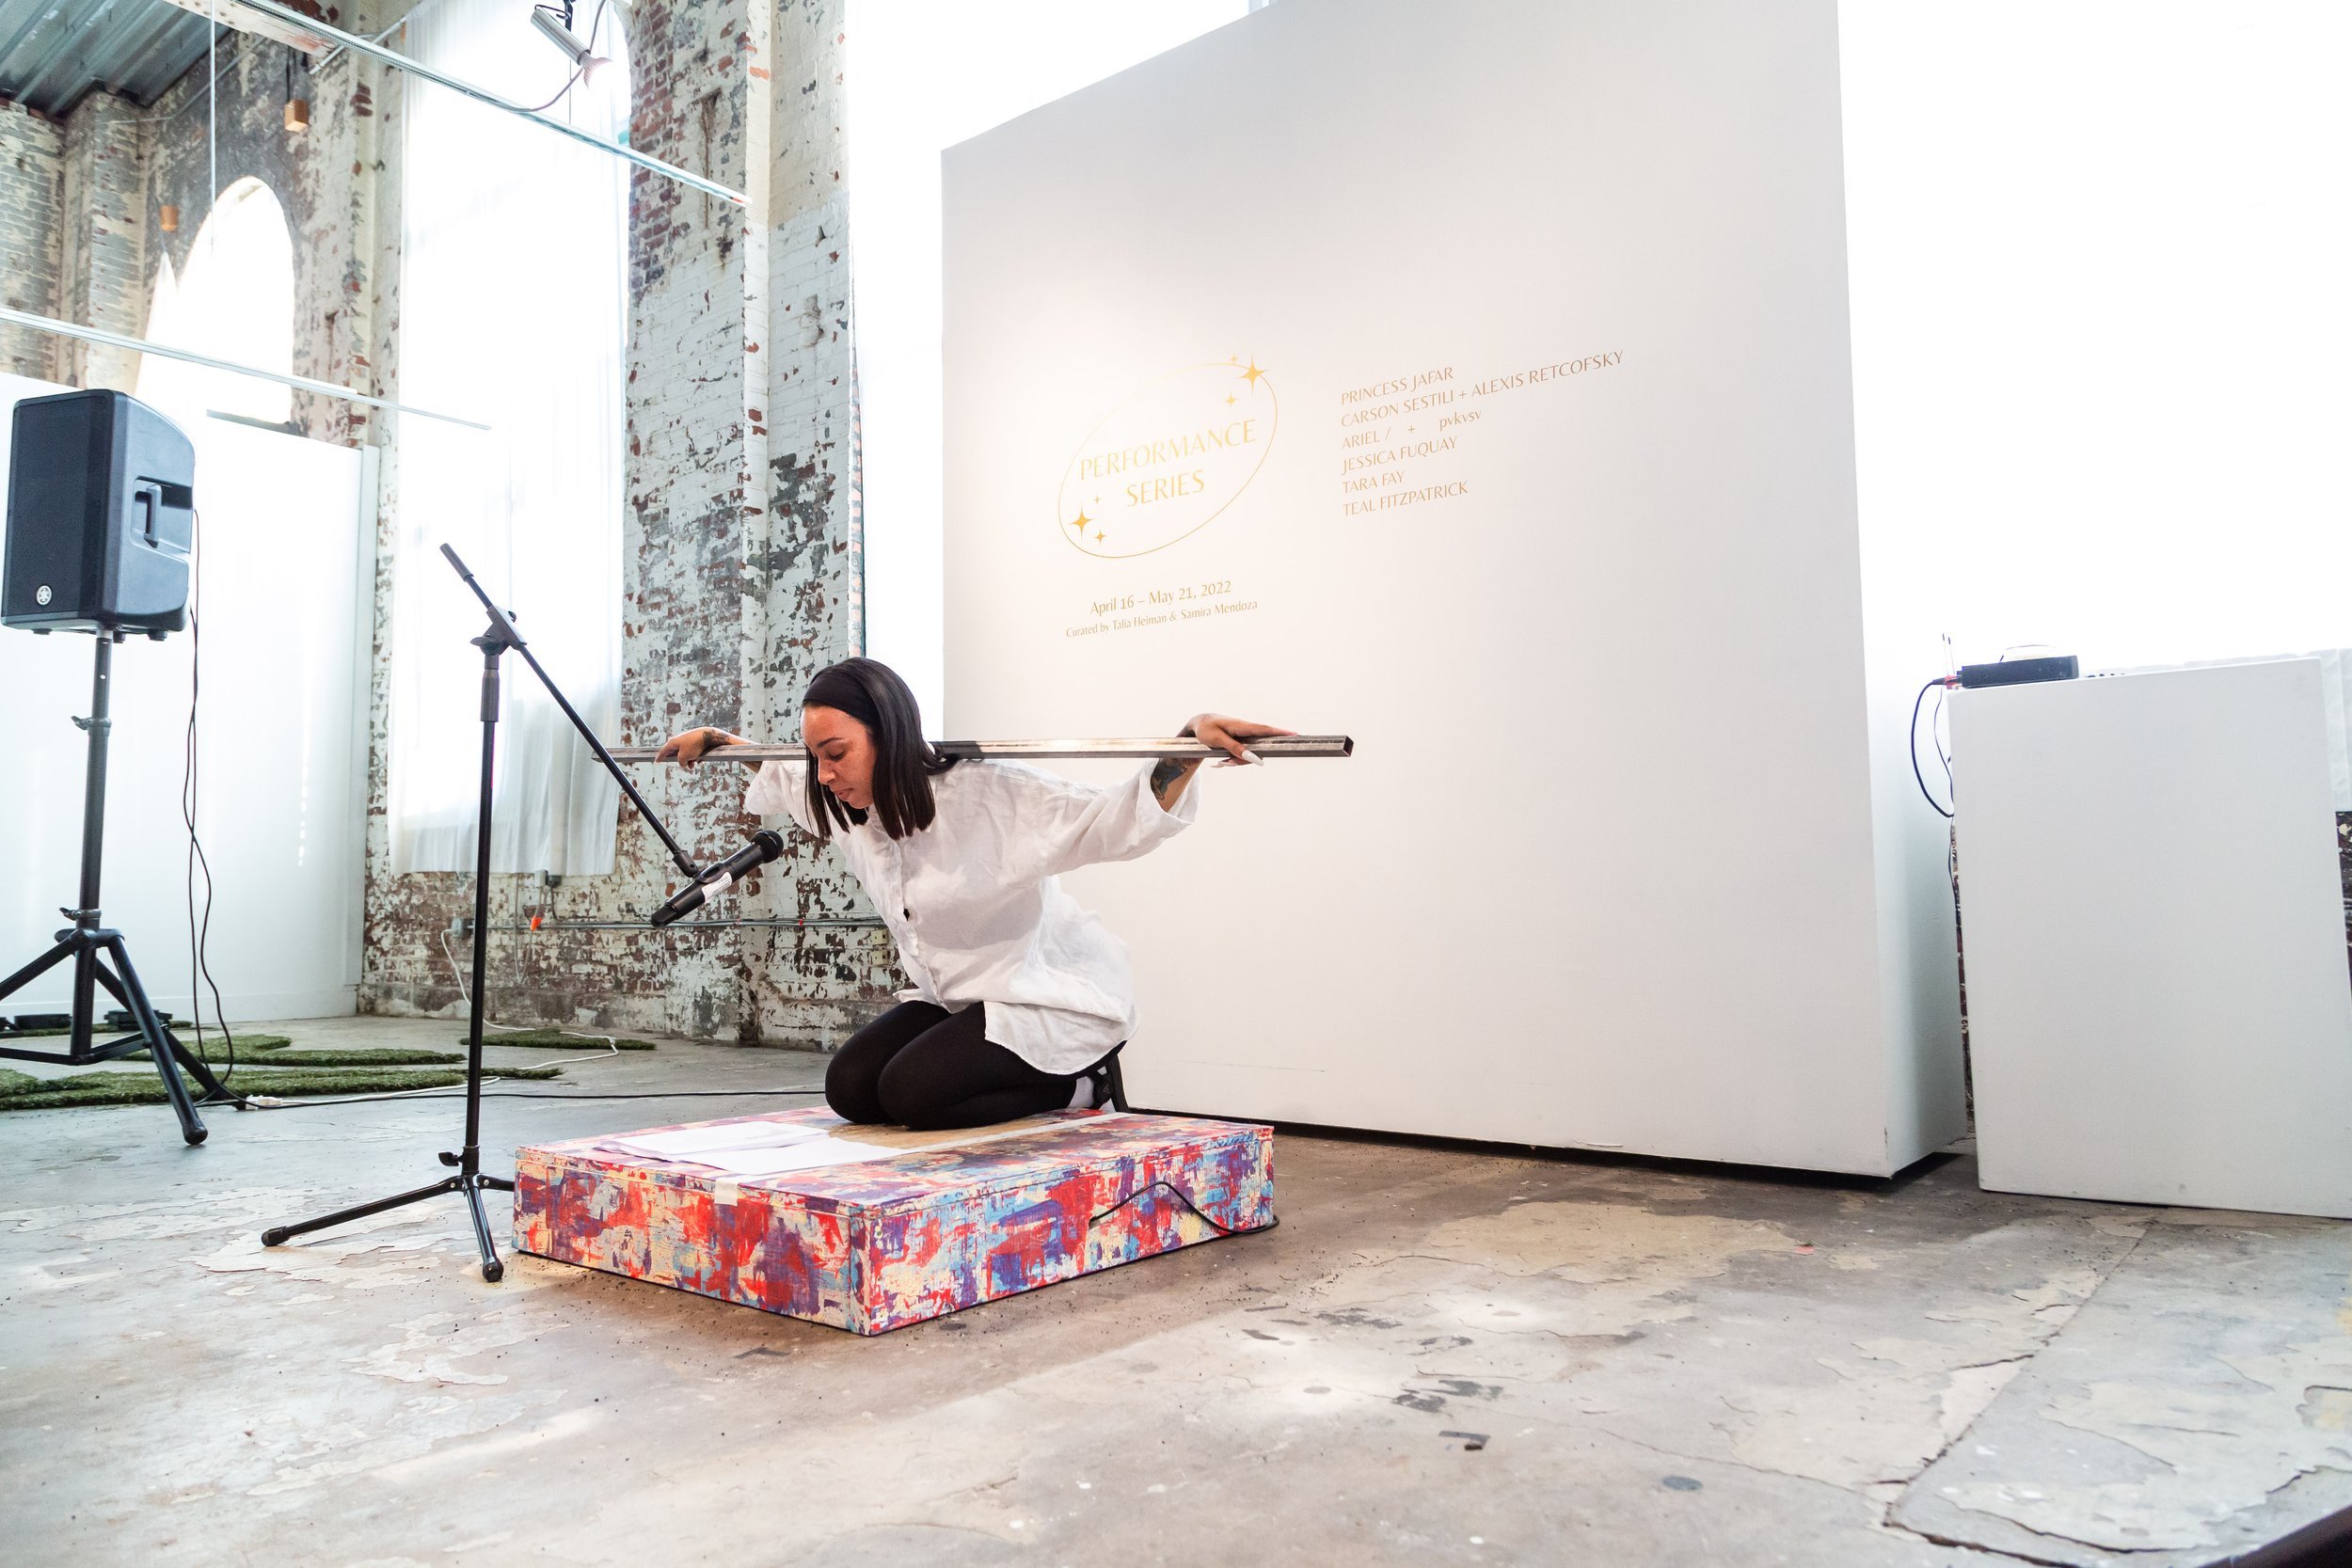  Durational Performance @ AAP Performance Series May 2022 2019’s  Pittsburgh’s Inequality Across Gender and Race  is a research study that affirms how Pittsburgh is one of the worst cities in the country for health and economic outcomes of Black wome